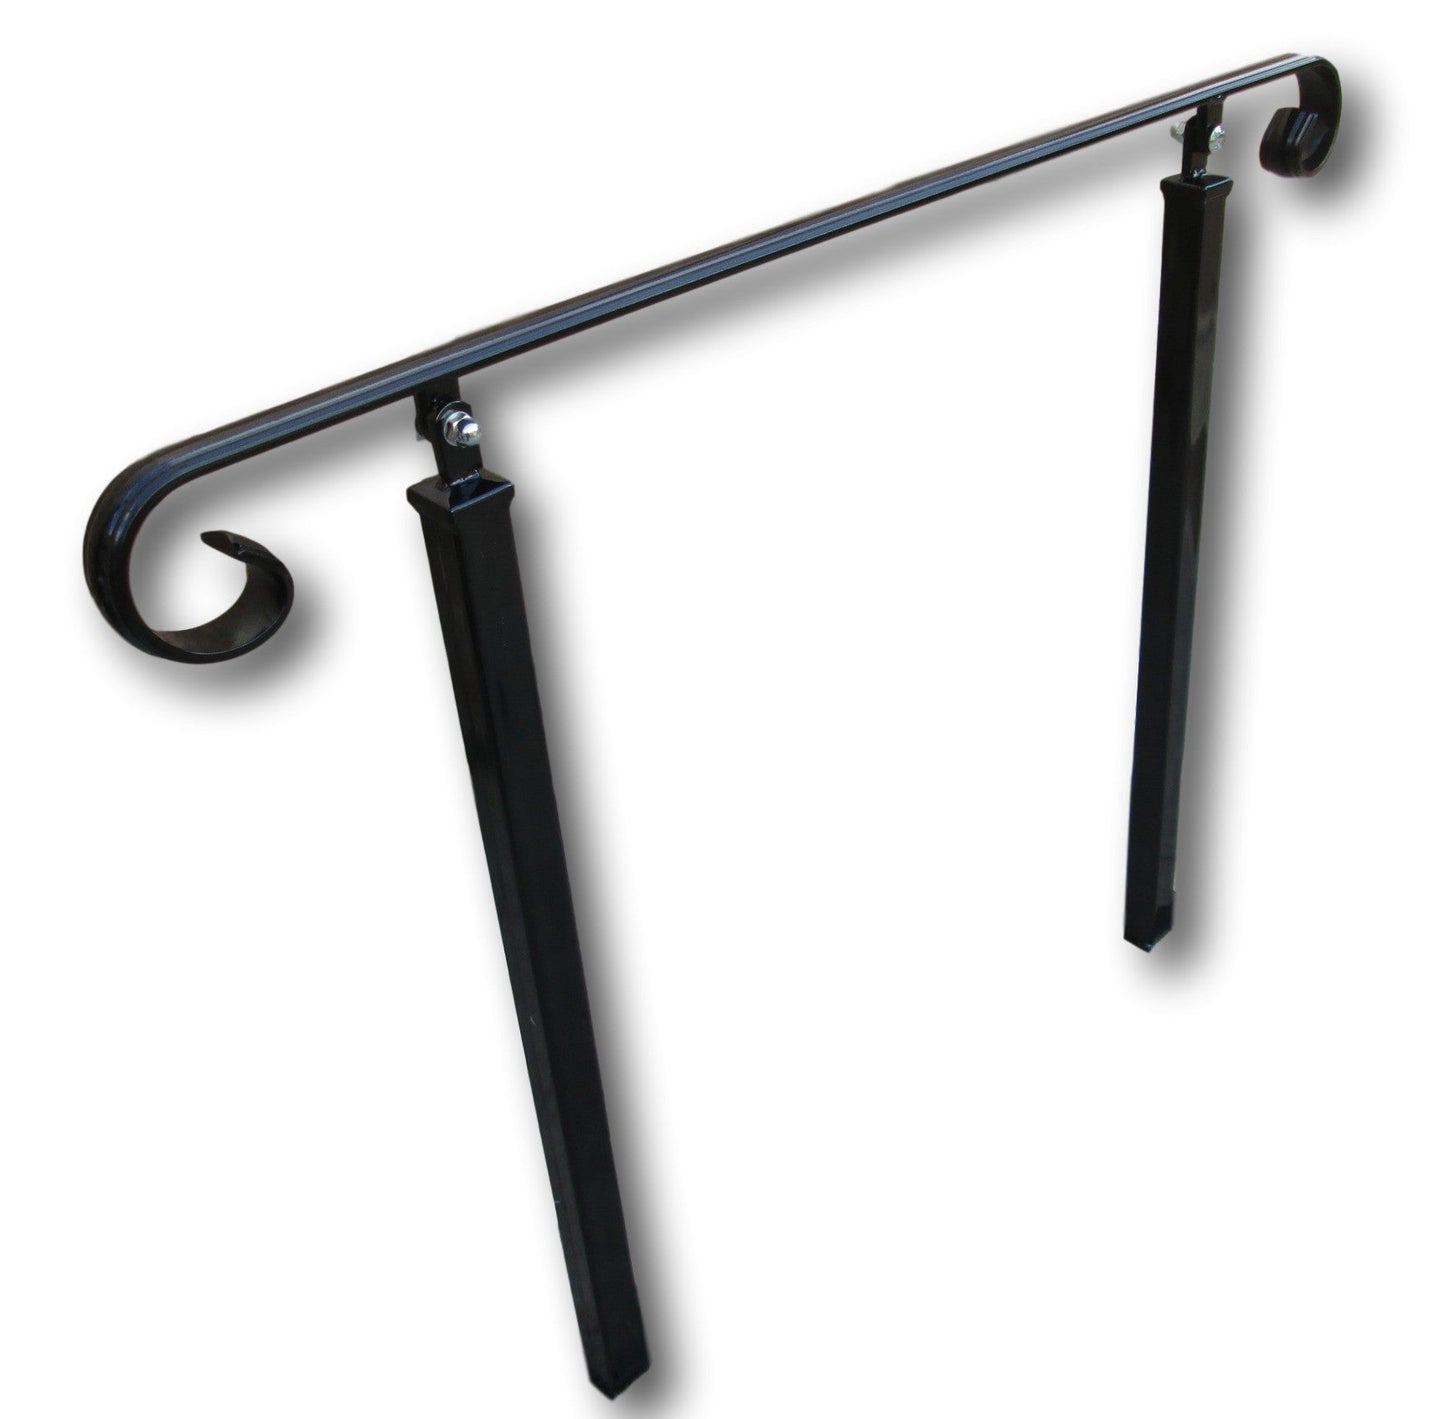 Wrought Iron Style Metal Handrail on Two Side Bolt Posts - Amon- 1m - 2.4m